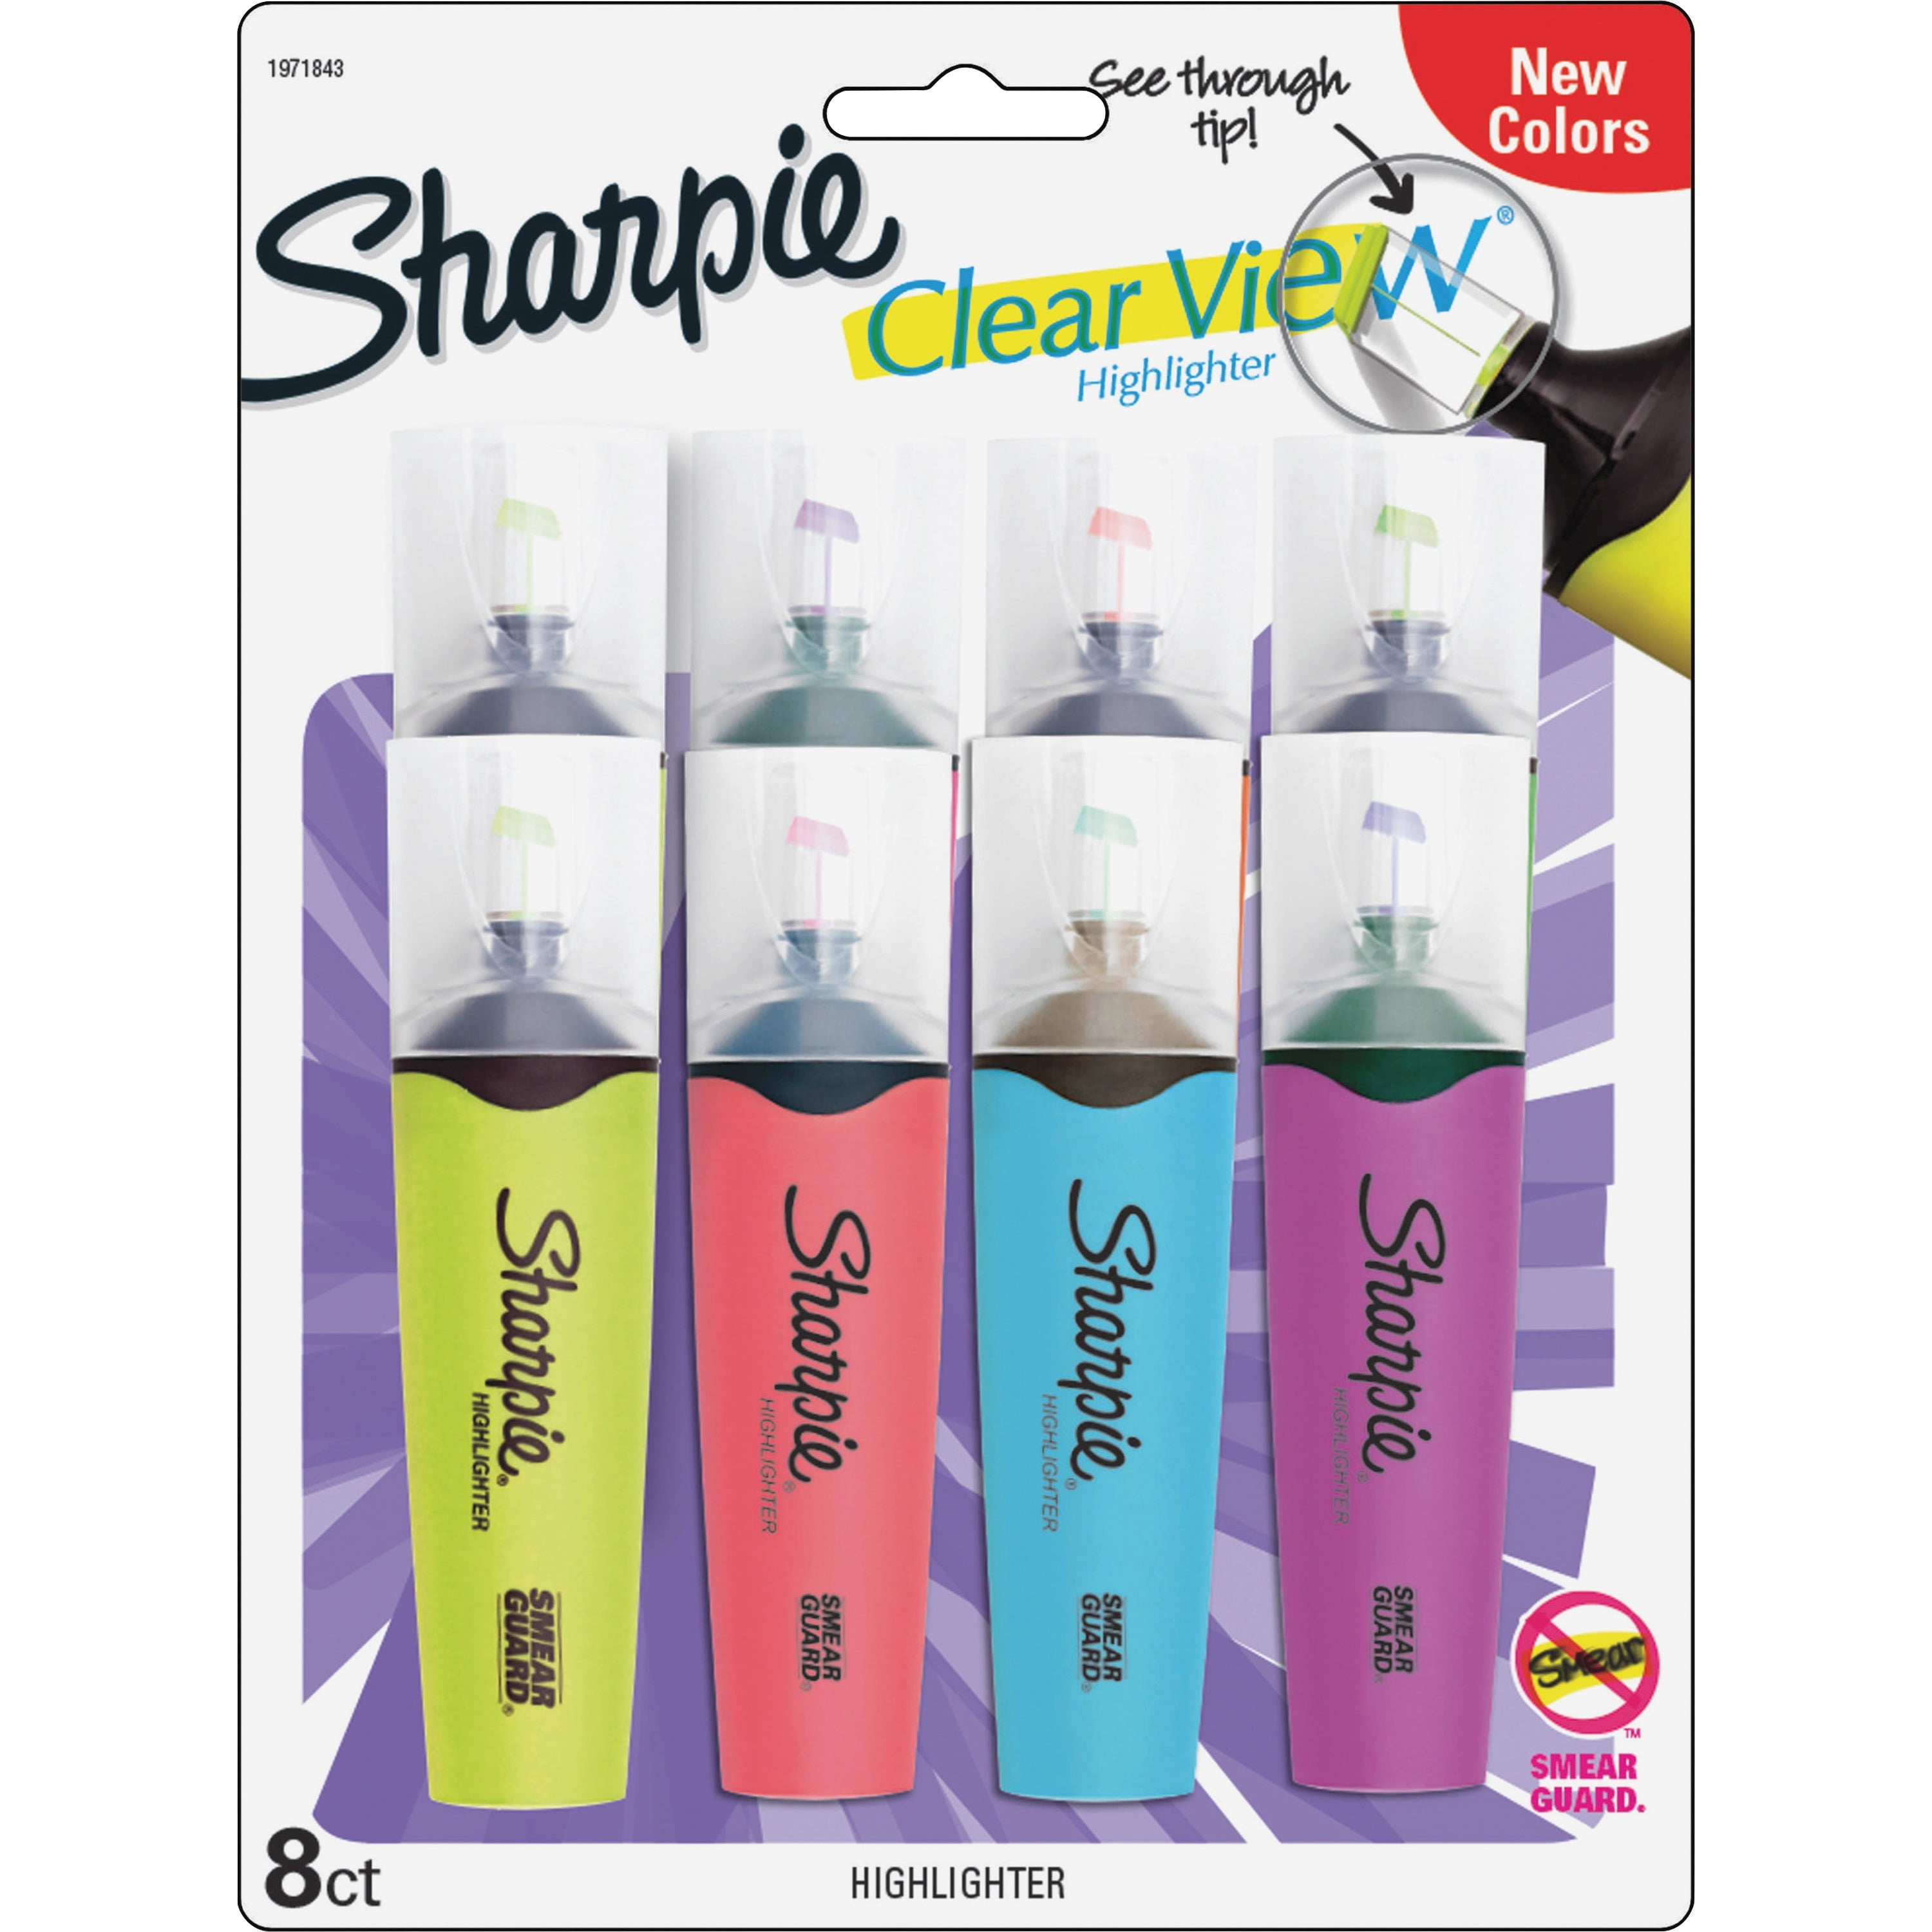 Sharpie Clear View Highlighters - Set of 12, Assorted Colors, Stick Style